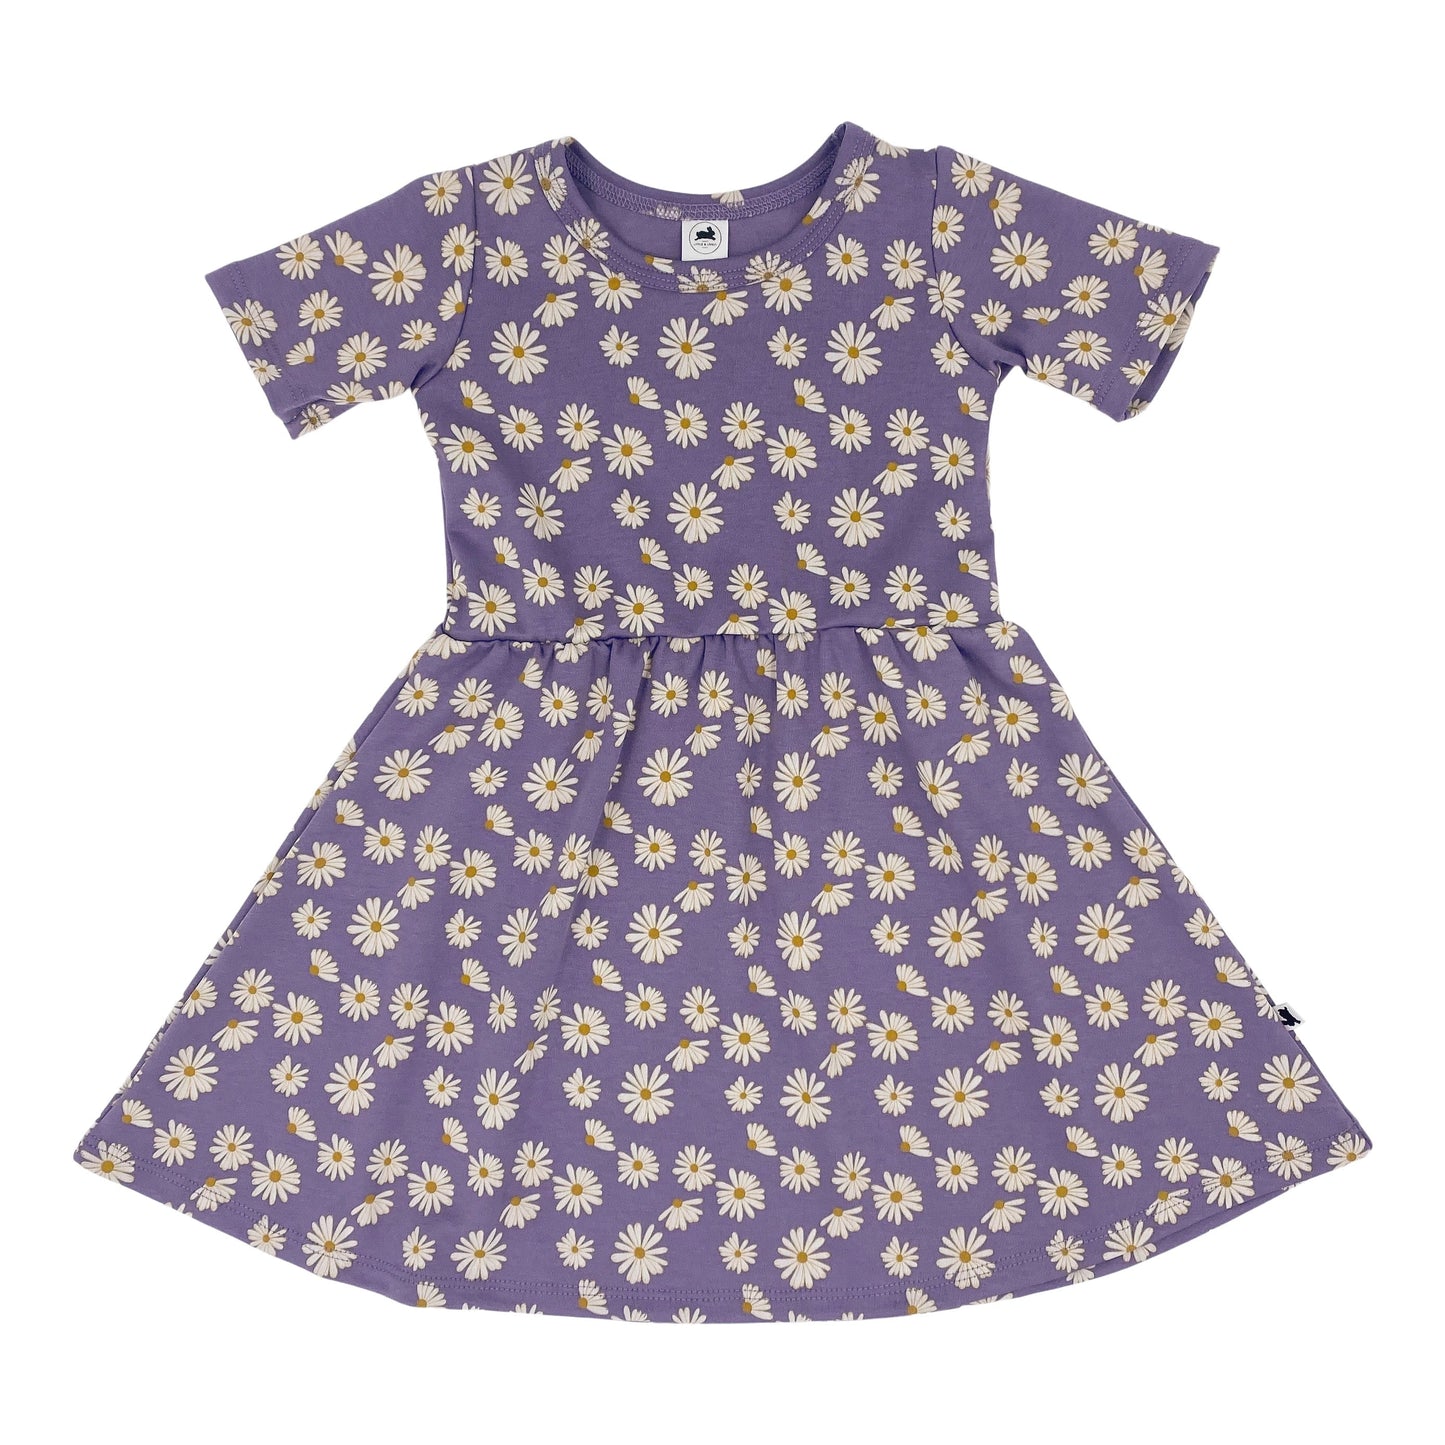 Baby/kid’s/youth Daphne Dress | Daisies Girl’s Bamboo/cotton 1